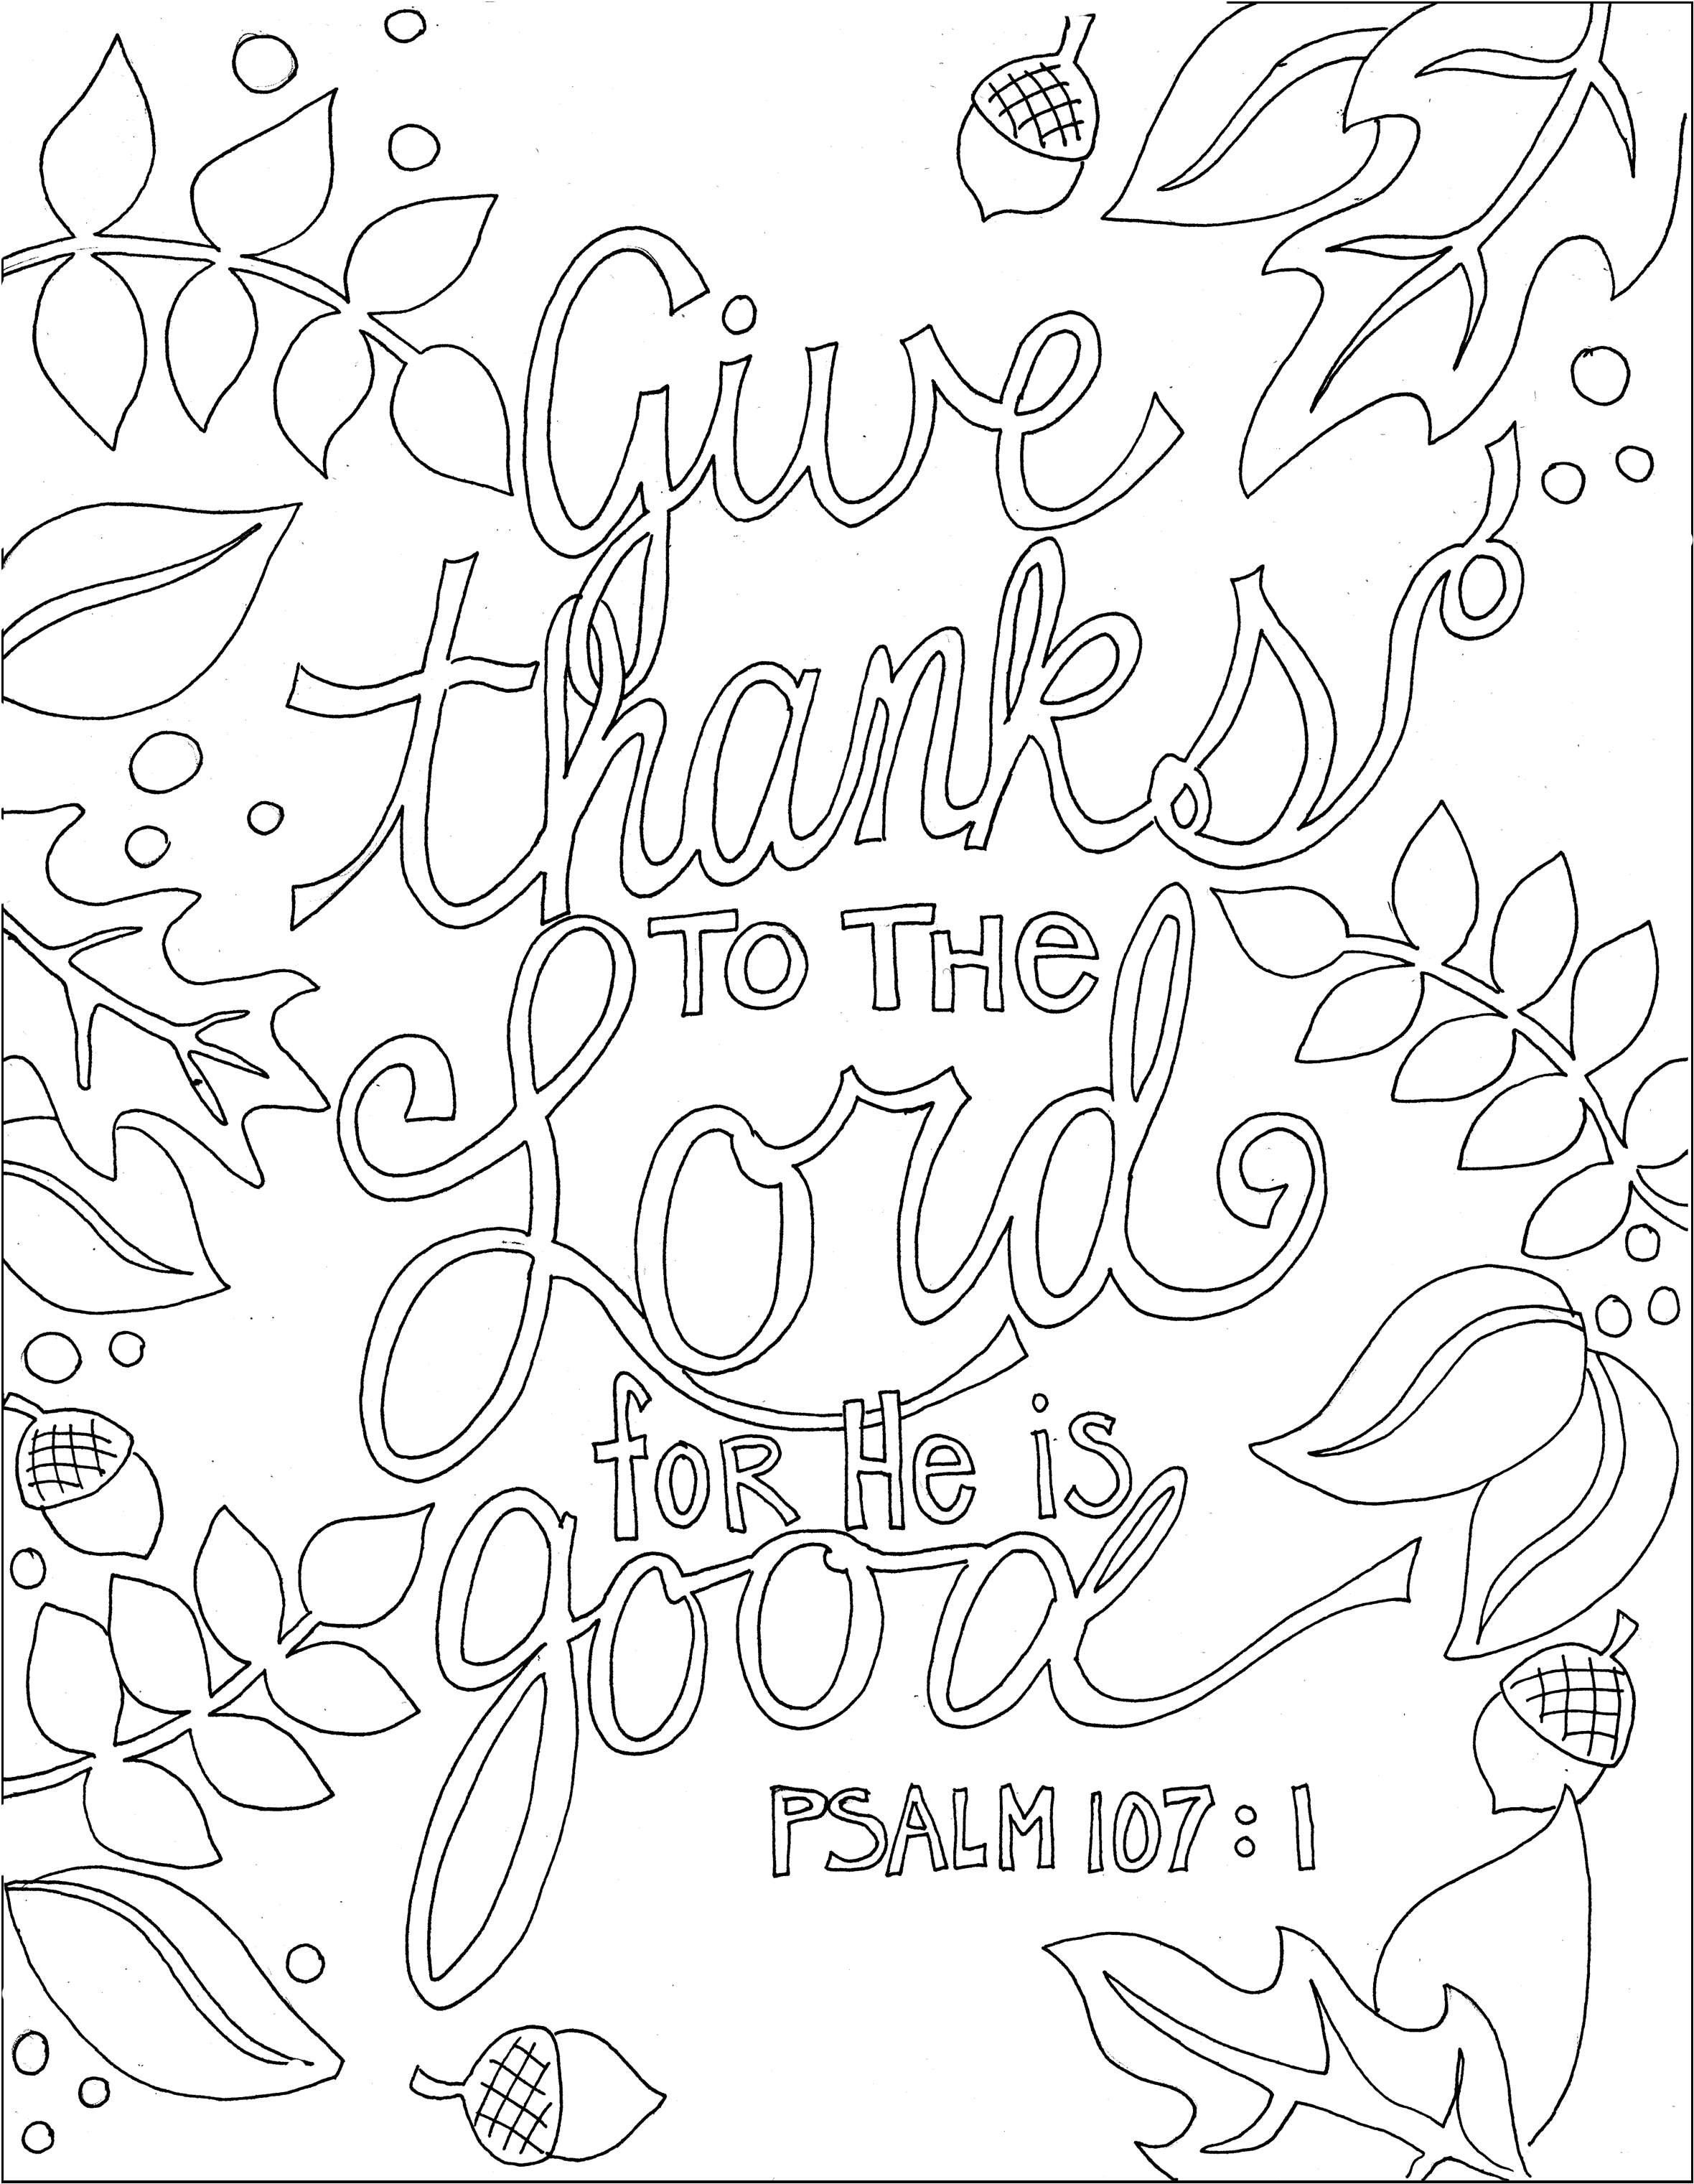 Bible Verse Coloring Page | Coloring Pages for Kids and for Adults